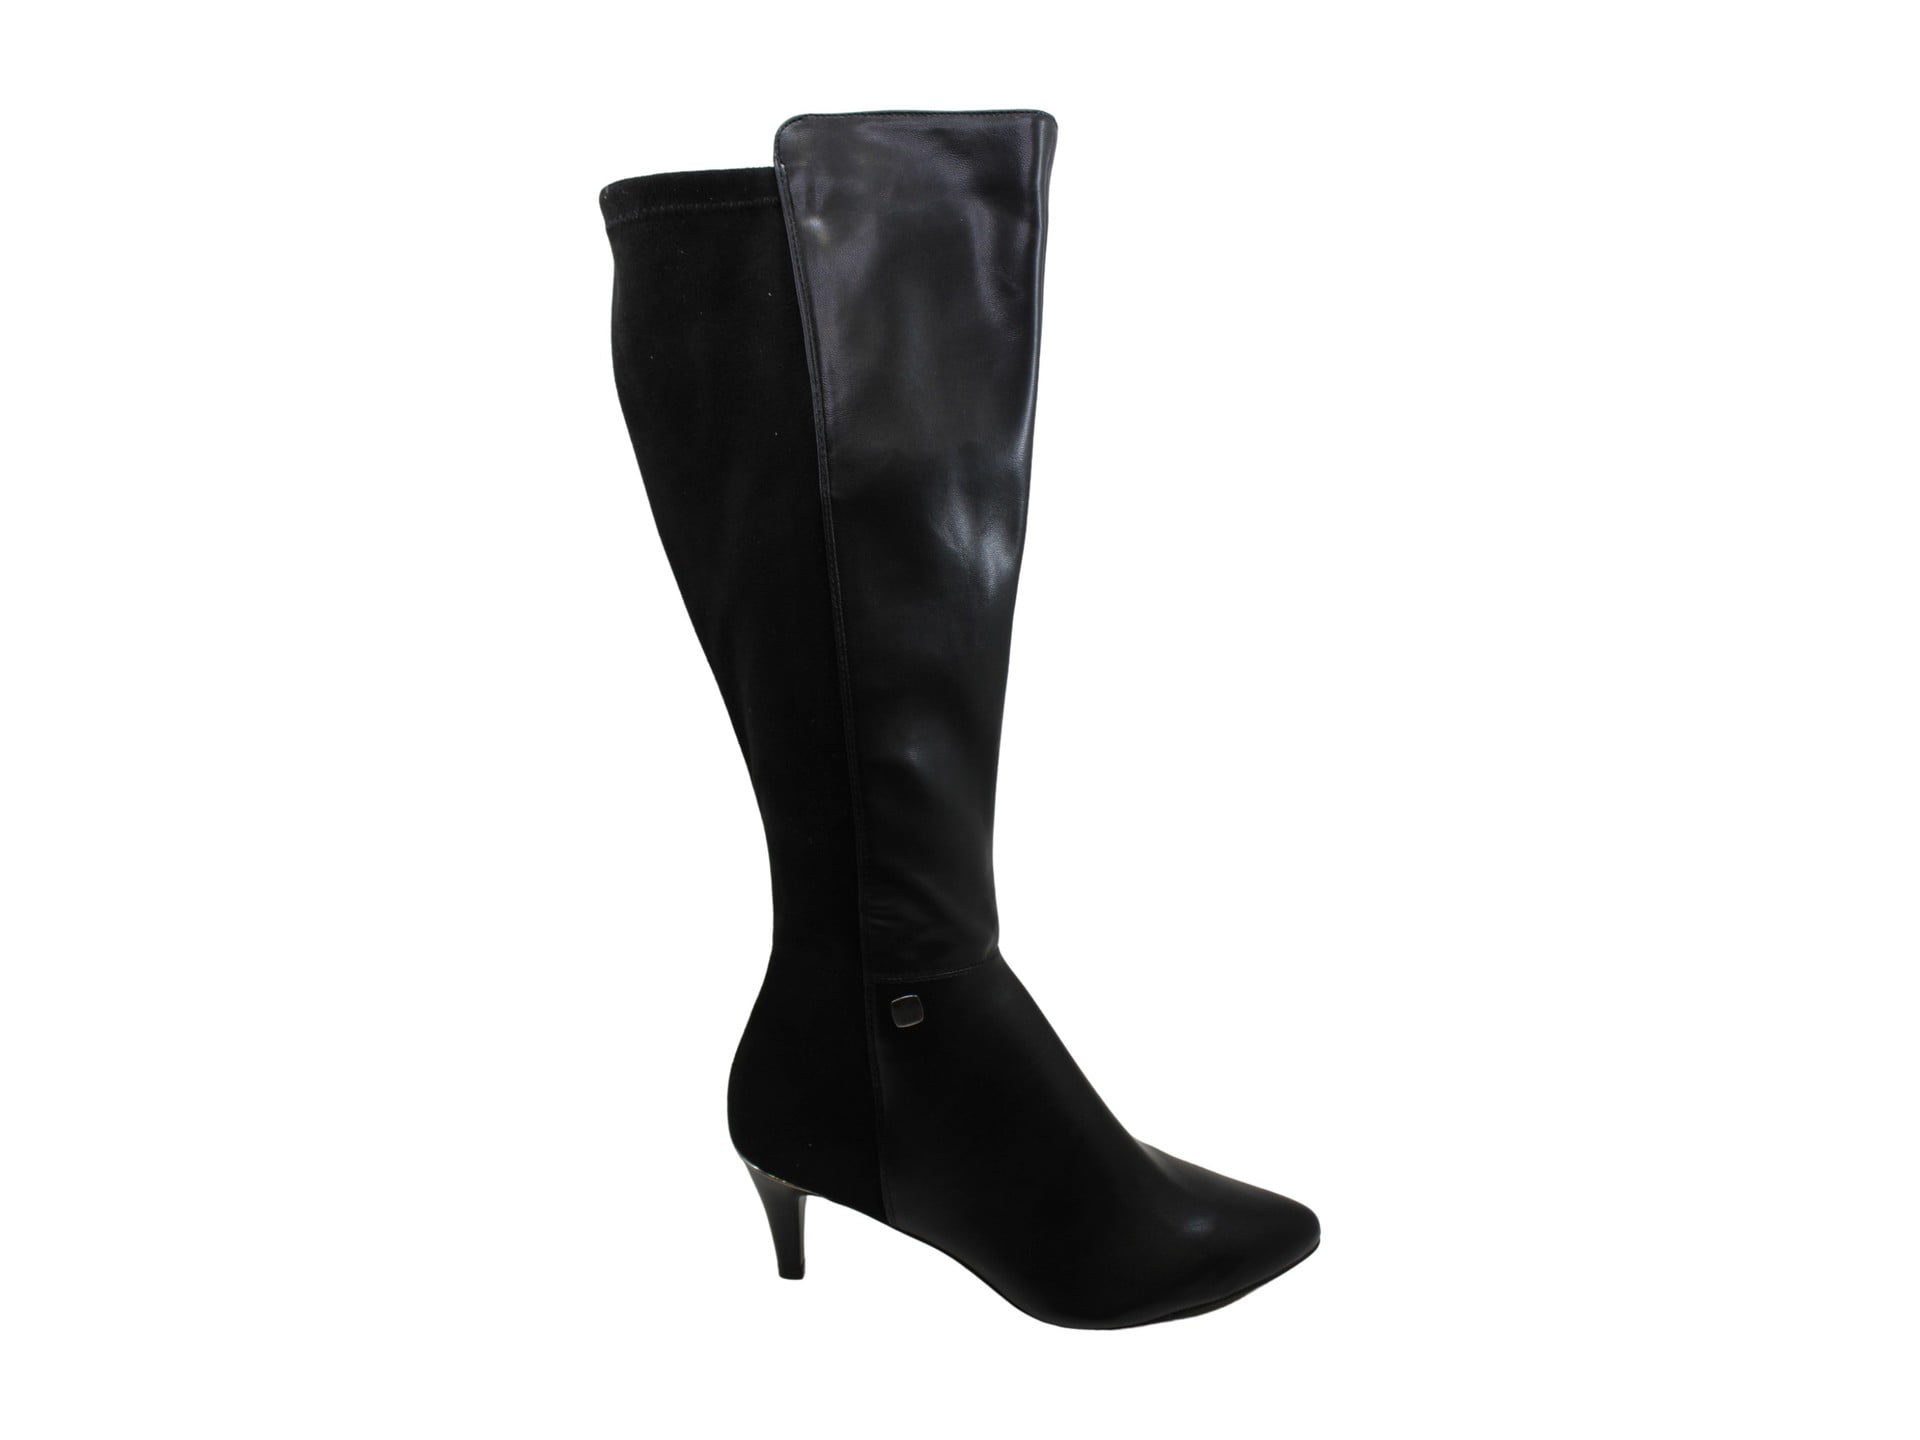 Size 11 RQY Alfani Womens Boots in Black Color